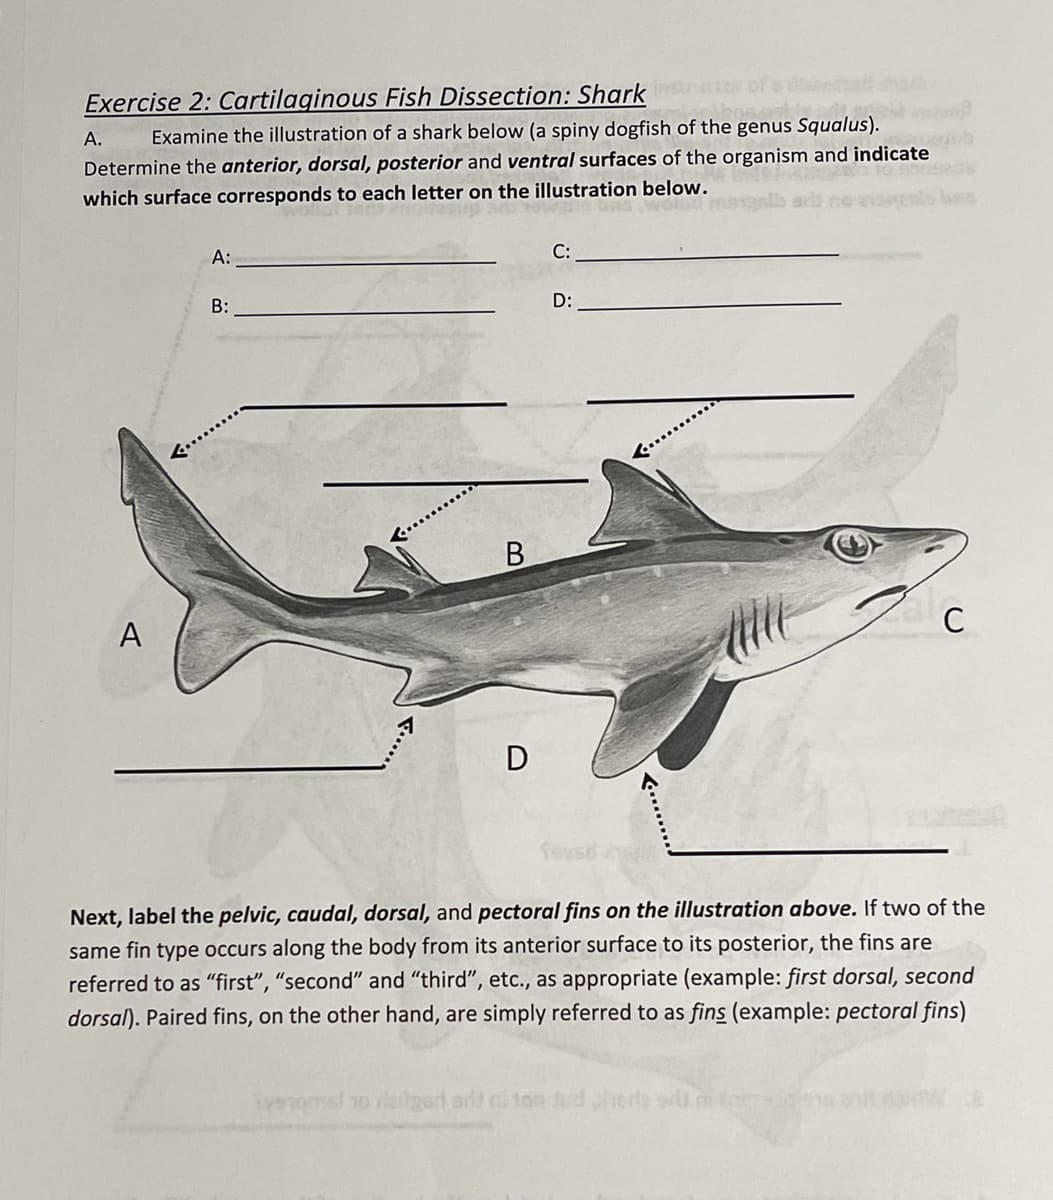 Exercise 2: Cartilaginous Fish Dissection: Shark
А.
Examine the illustration of a shark below (a spiny dogfish of the genus Squalus).
Determine the anterior, dorsal, posterior and ventral surfaces of the organism and indicate
which surface corresponds to each letter on the illustration below.
A:
C:
В:
D:
B.
C
A
D
Next, label the pelvic, caudal, dorsal, and pectoral fins on the illustration above. If two of the
same fin type occurs along the body from its anterior surface to its posterior, the fins are
referred to as "first", "second" and "third", etc., as appropriate (example: first dorsal, second
dorsal). Paired fins, on the other hand, are simply referred to as fins (example: pectoral fins)
Eyengmsl 1o itgard ors ni ton Jud pherla su.mt 16 anil
